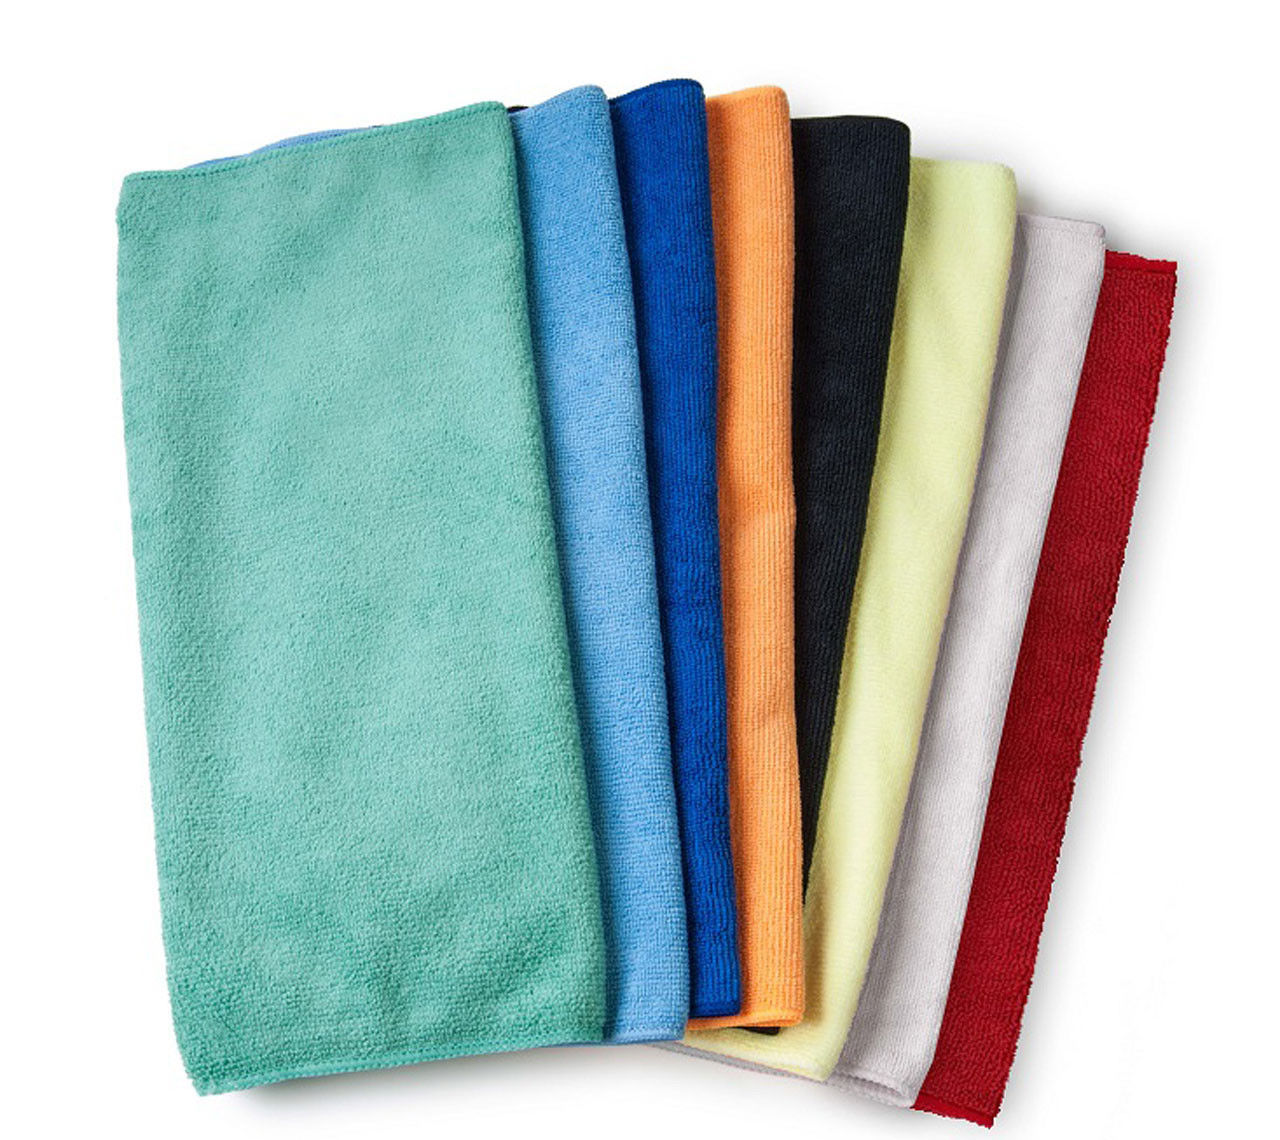 Can these golf towels in bulk be washed and reused?